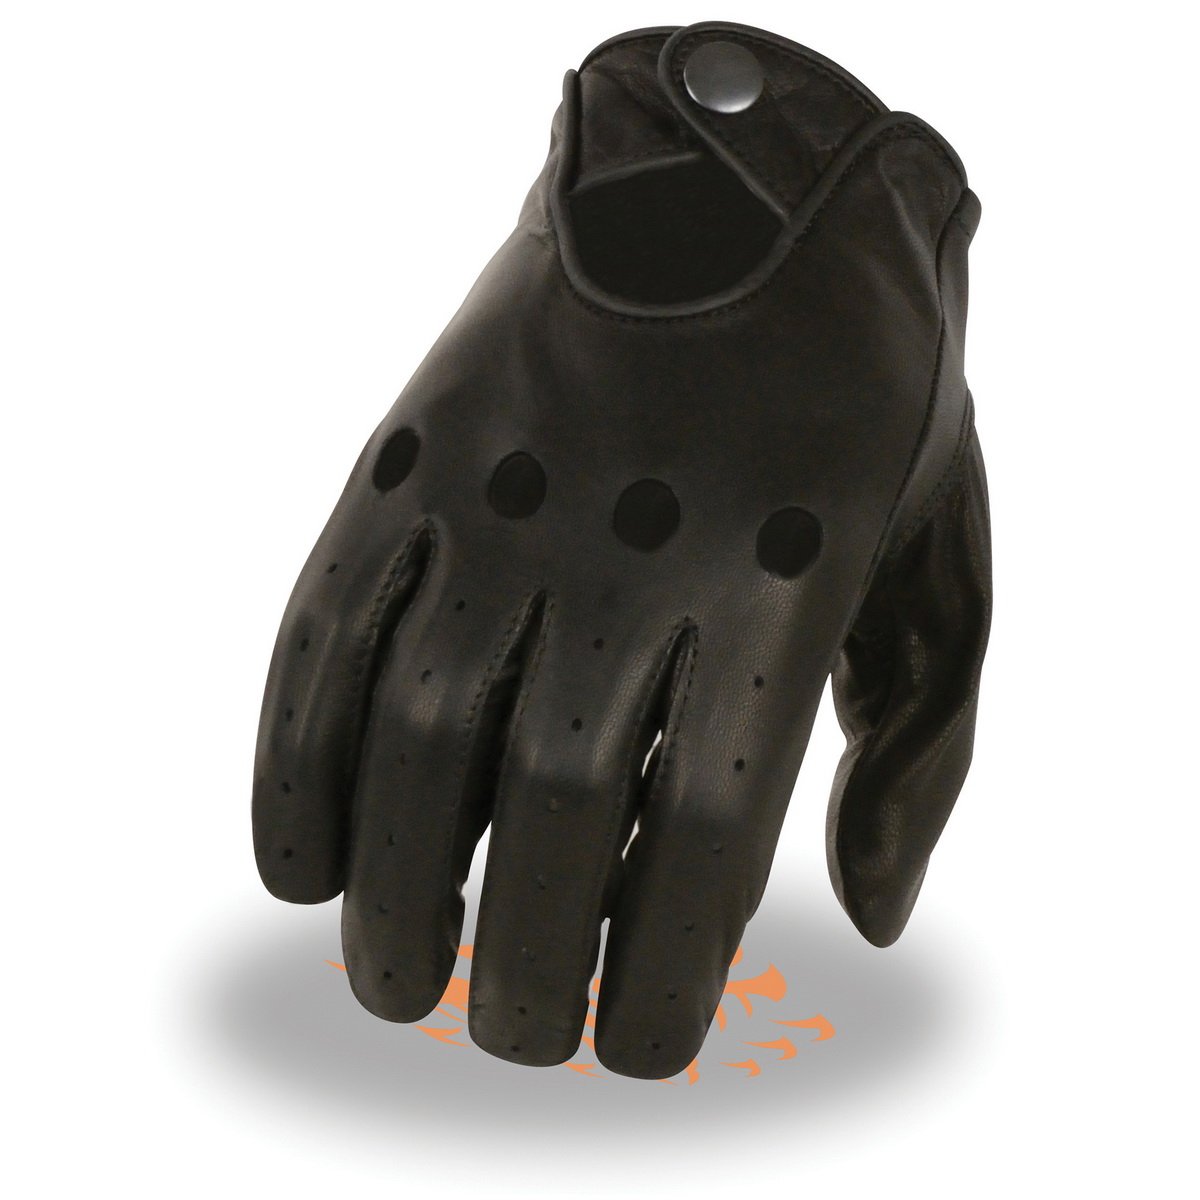 Milwaukee Leather SH729 Men's Black Unlined Leather Pro Driving Gloves